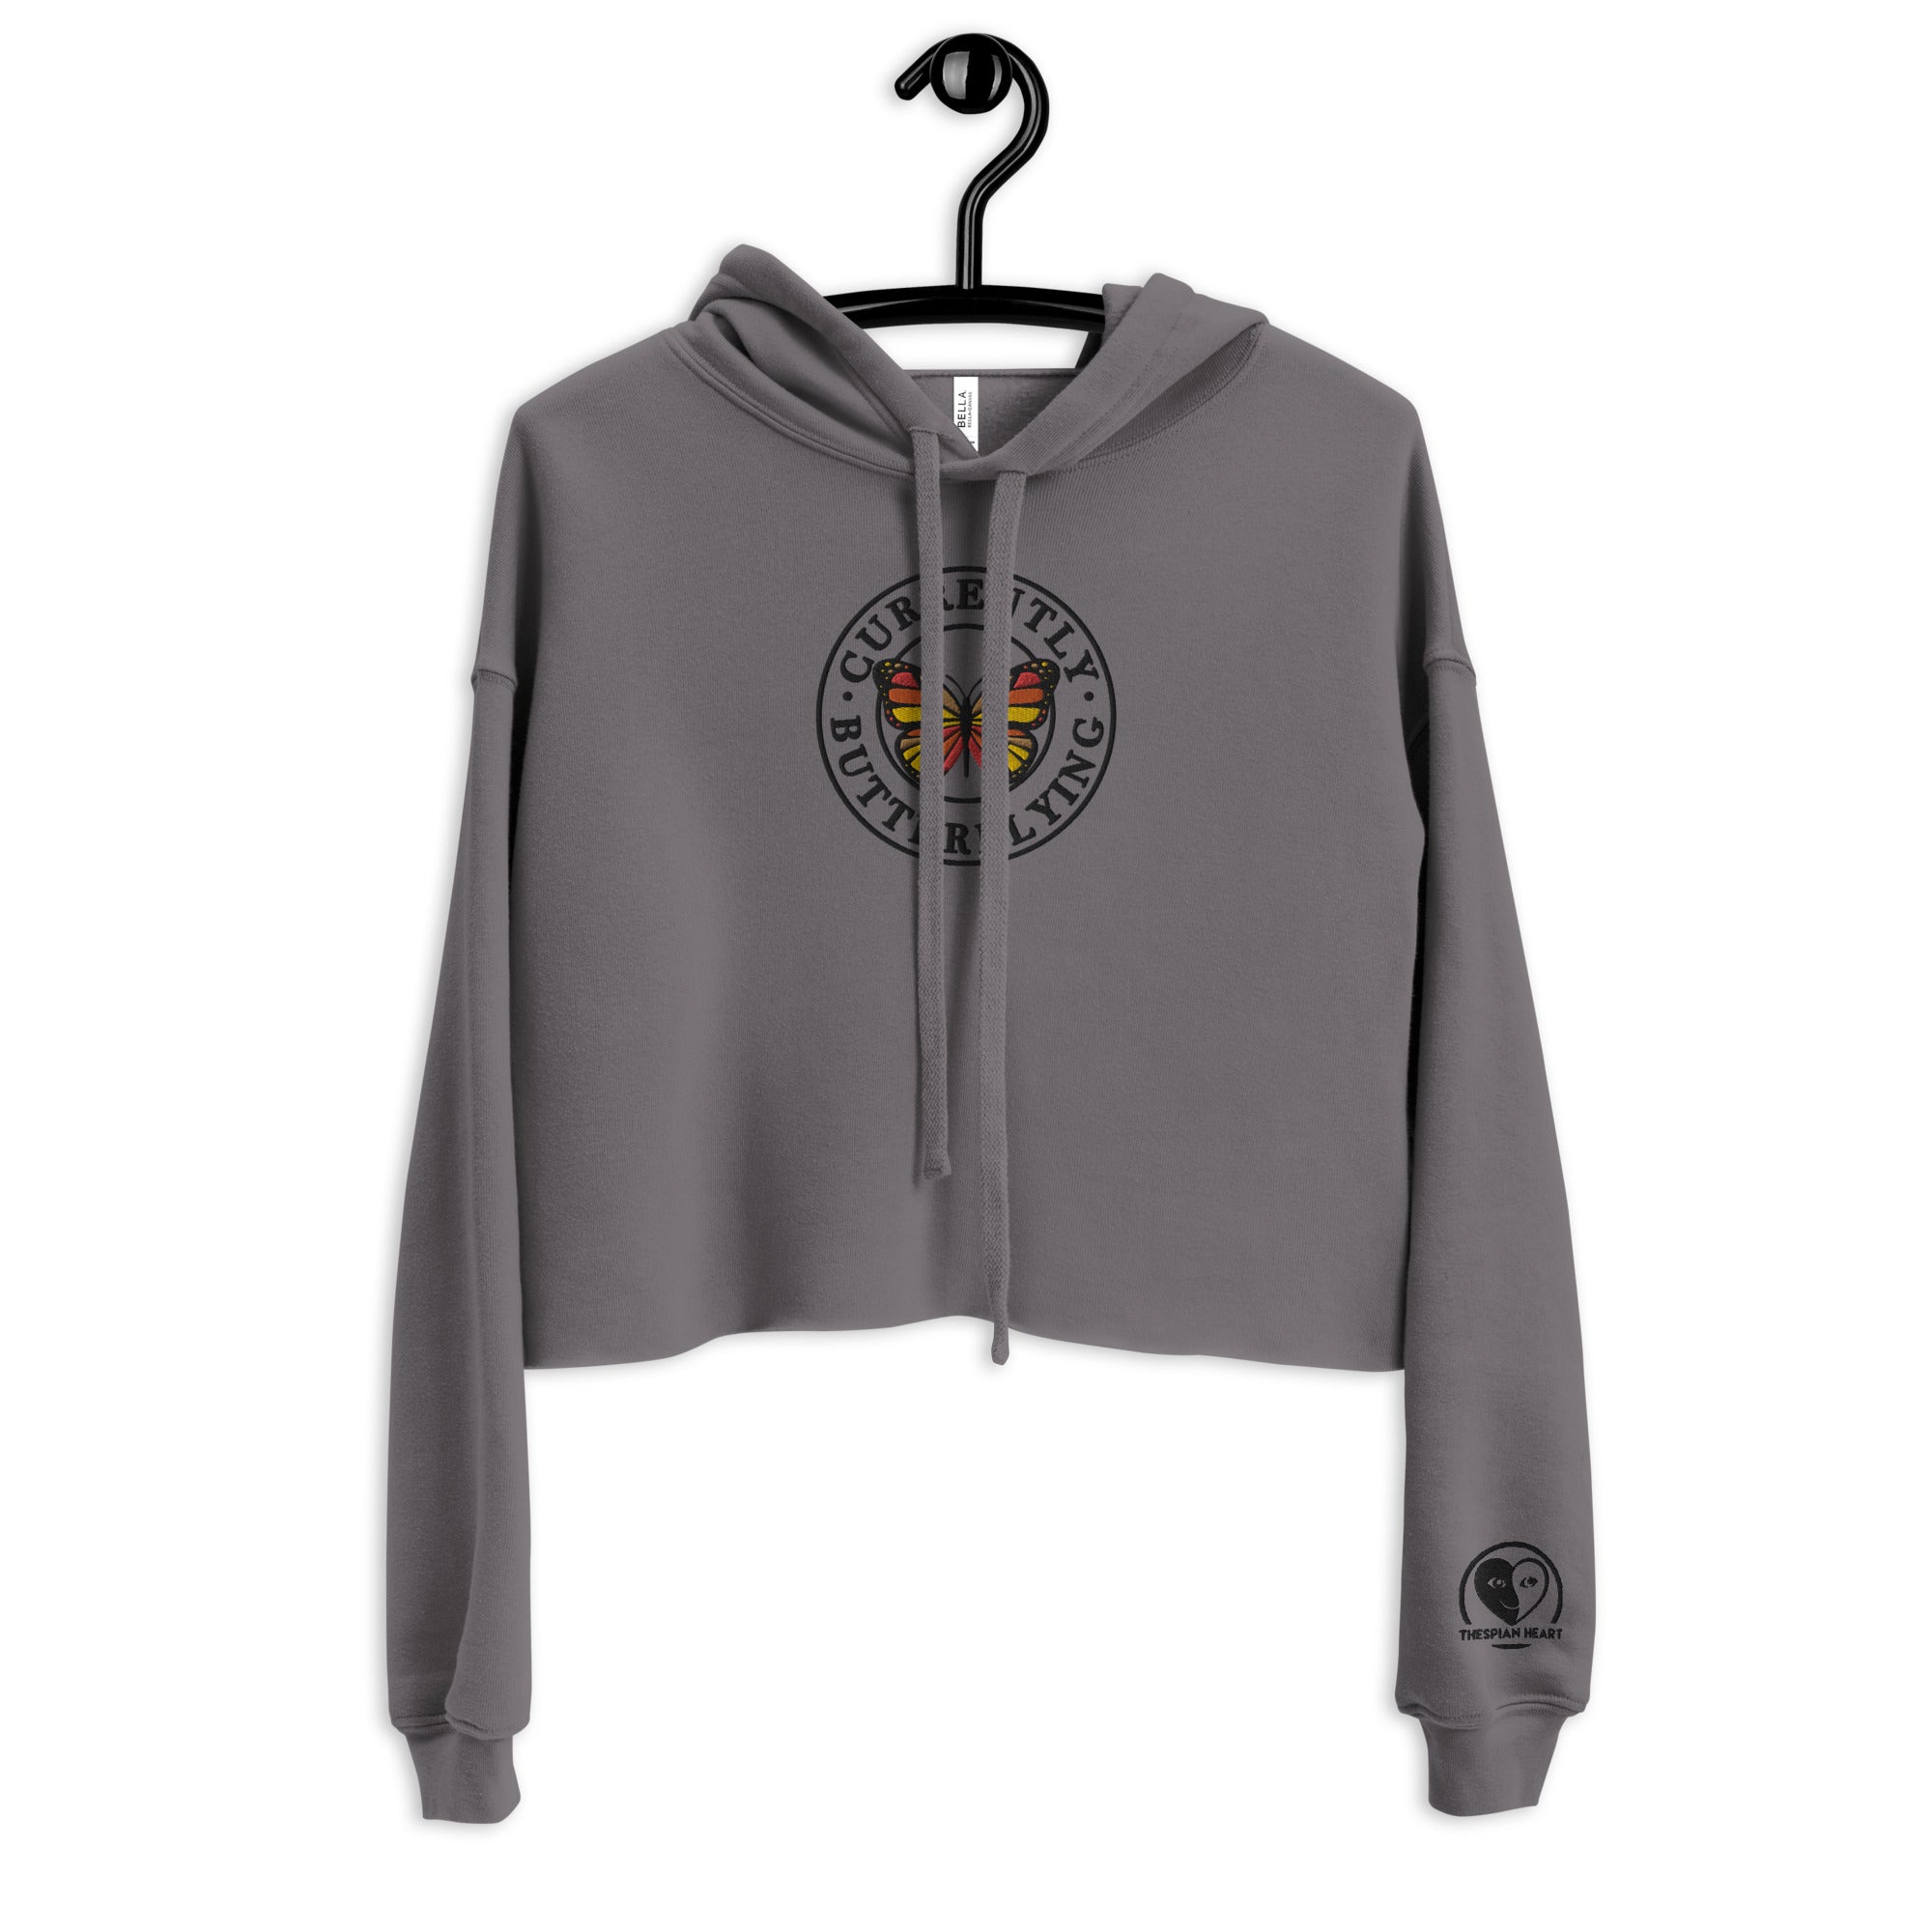 Currently Butterflying - Embroidered Crop Top Hoodie